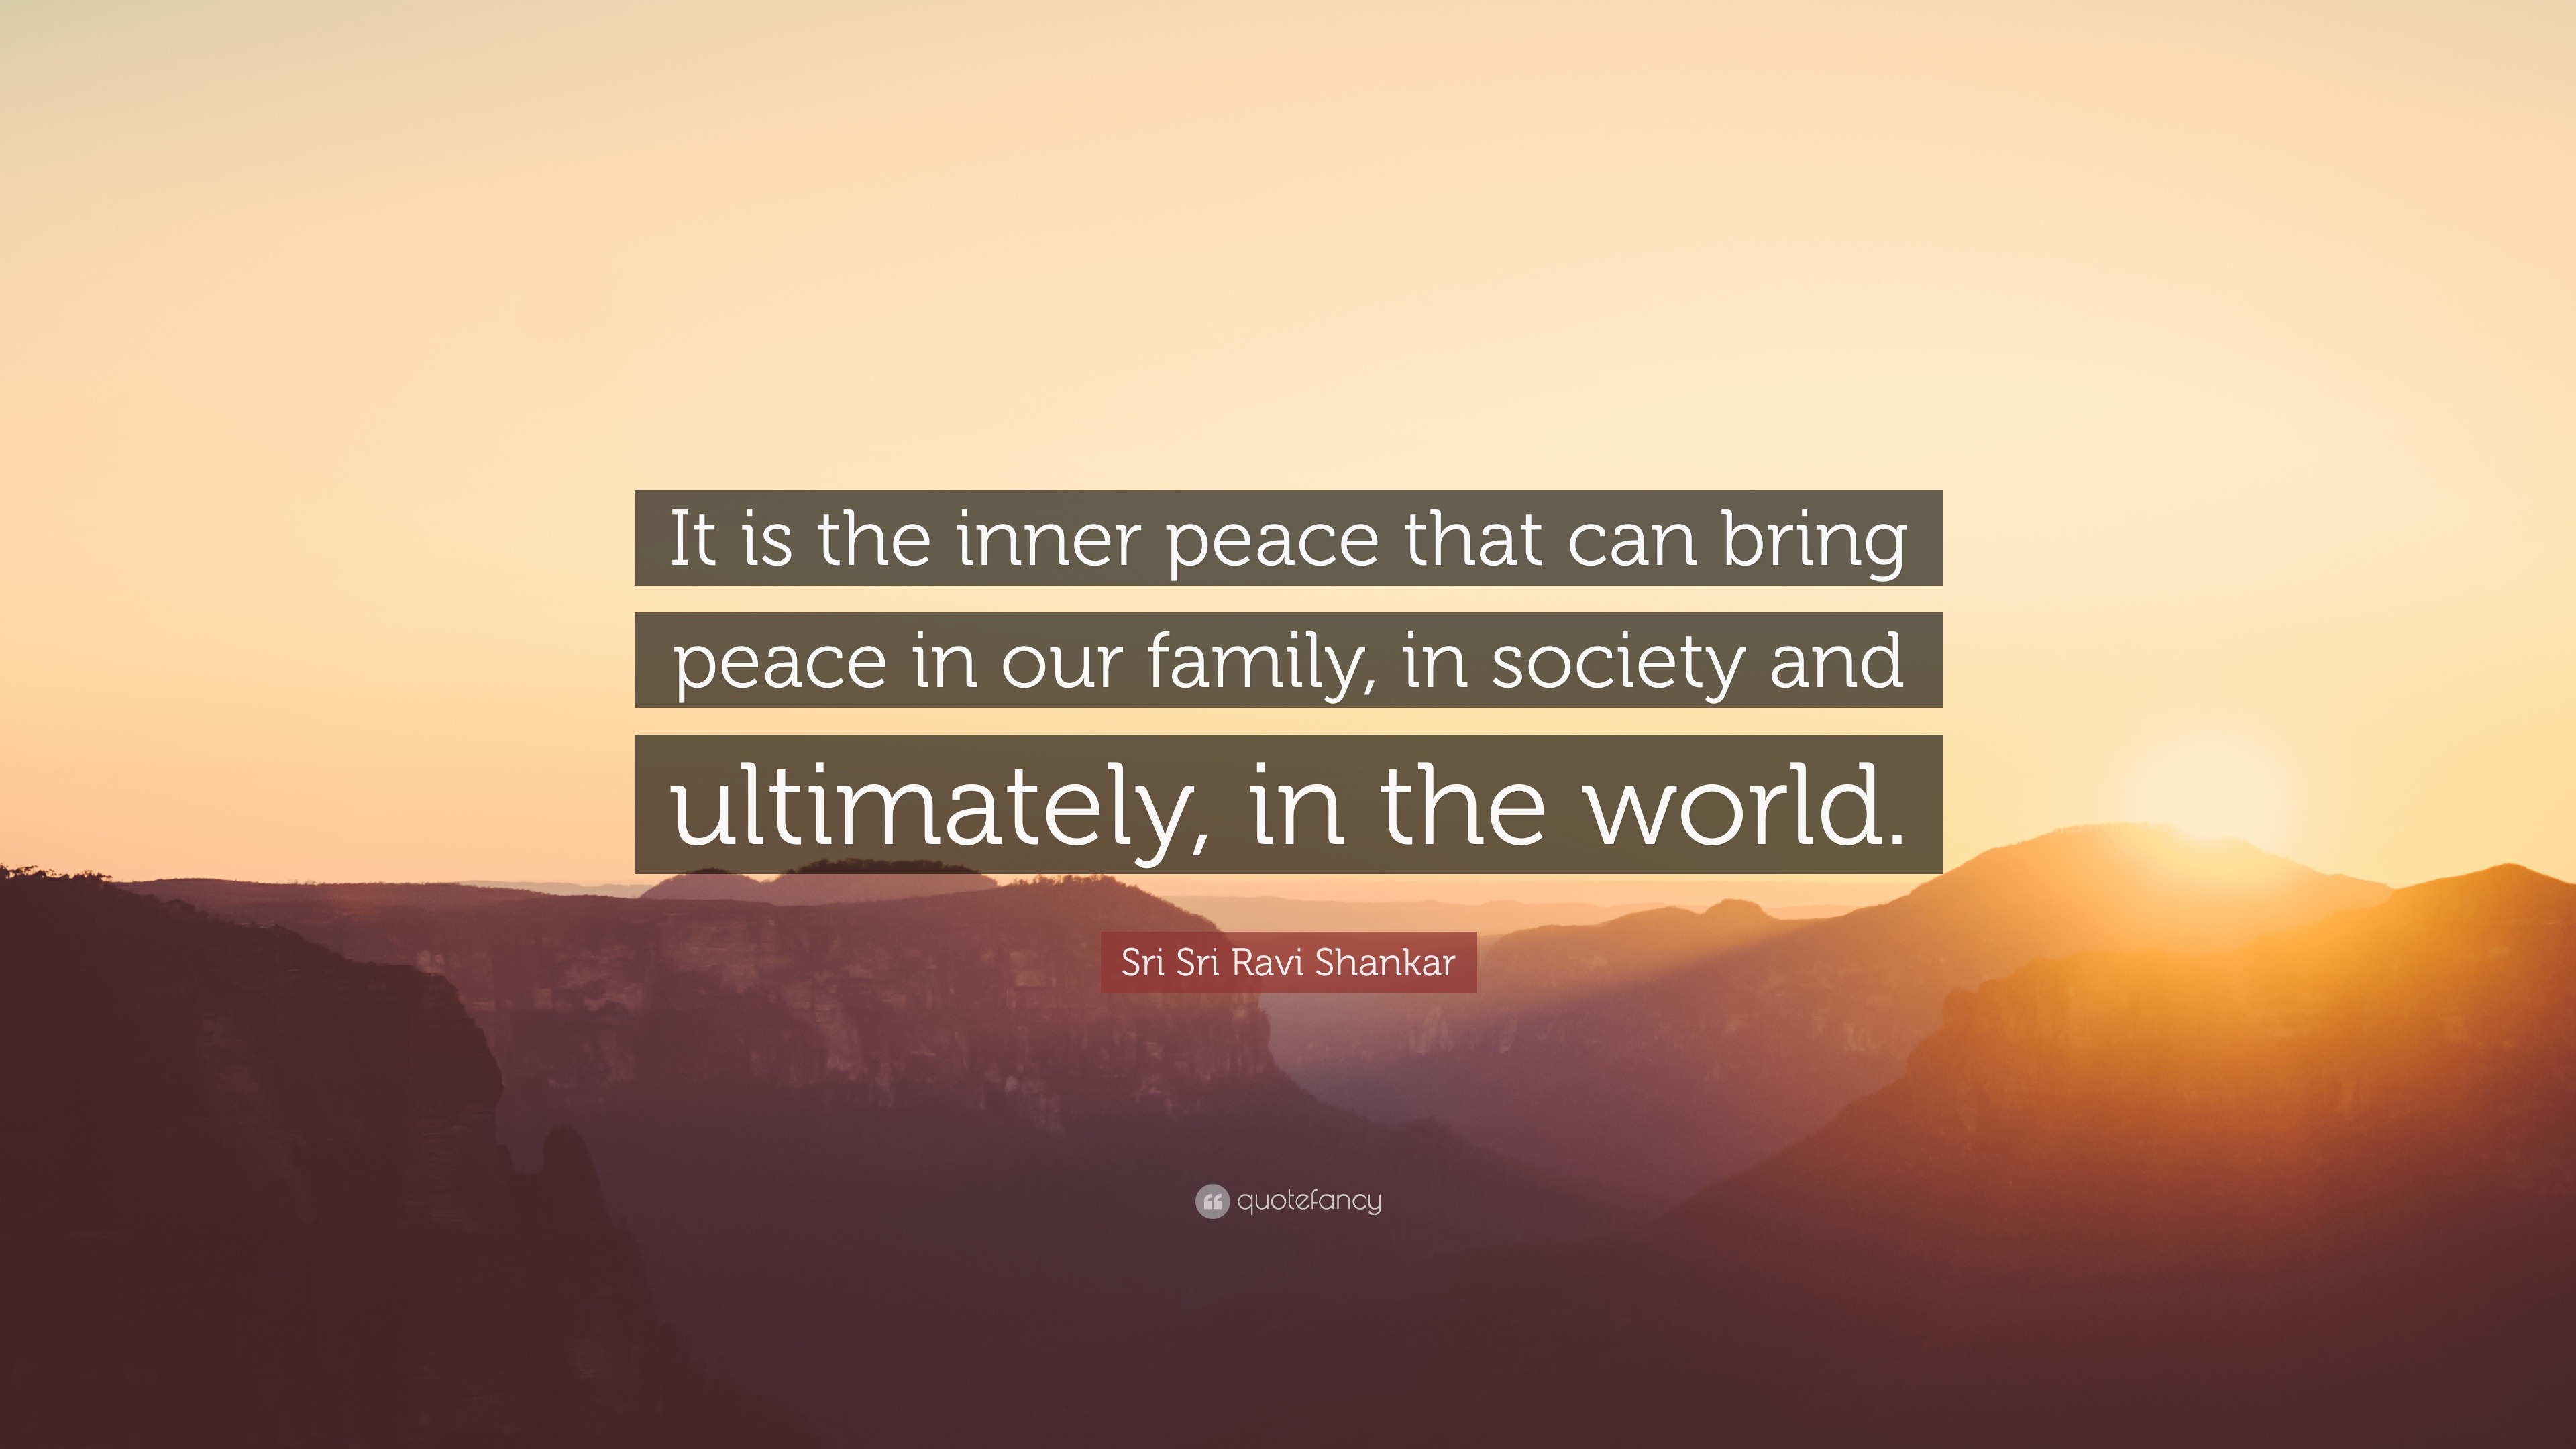 Sri Sri Ravi Shankar Quote: “It is the inner peace that can bring peace in  our